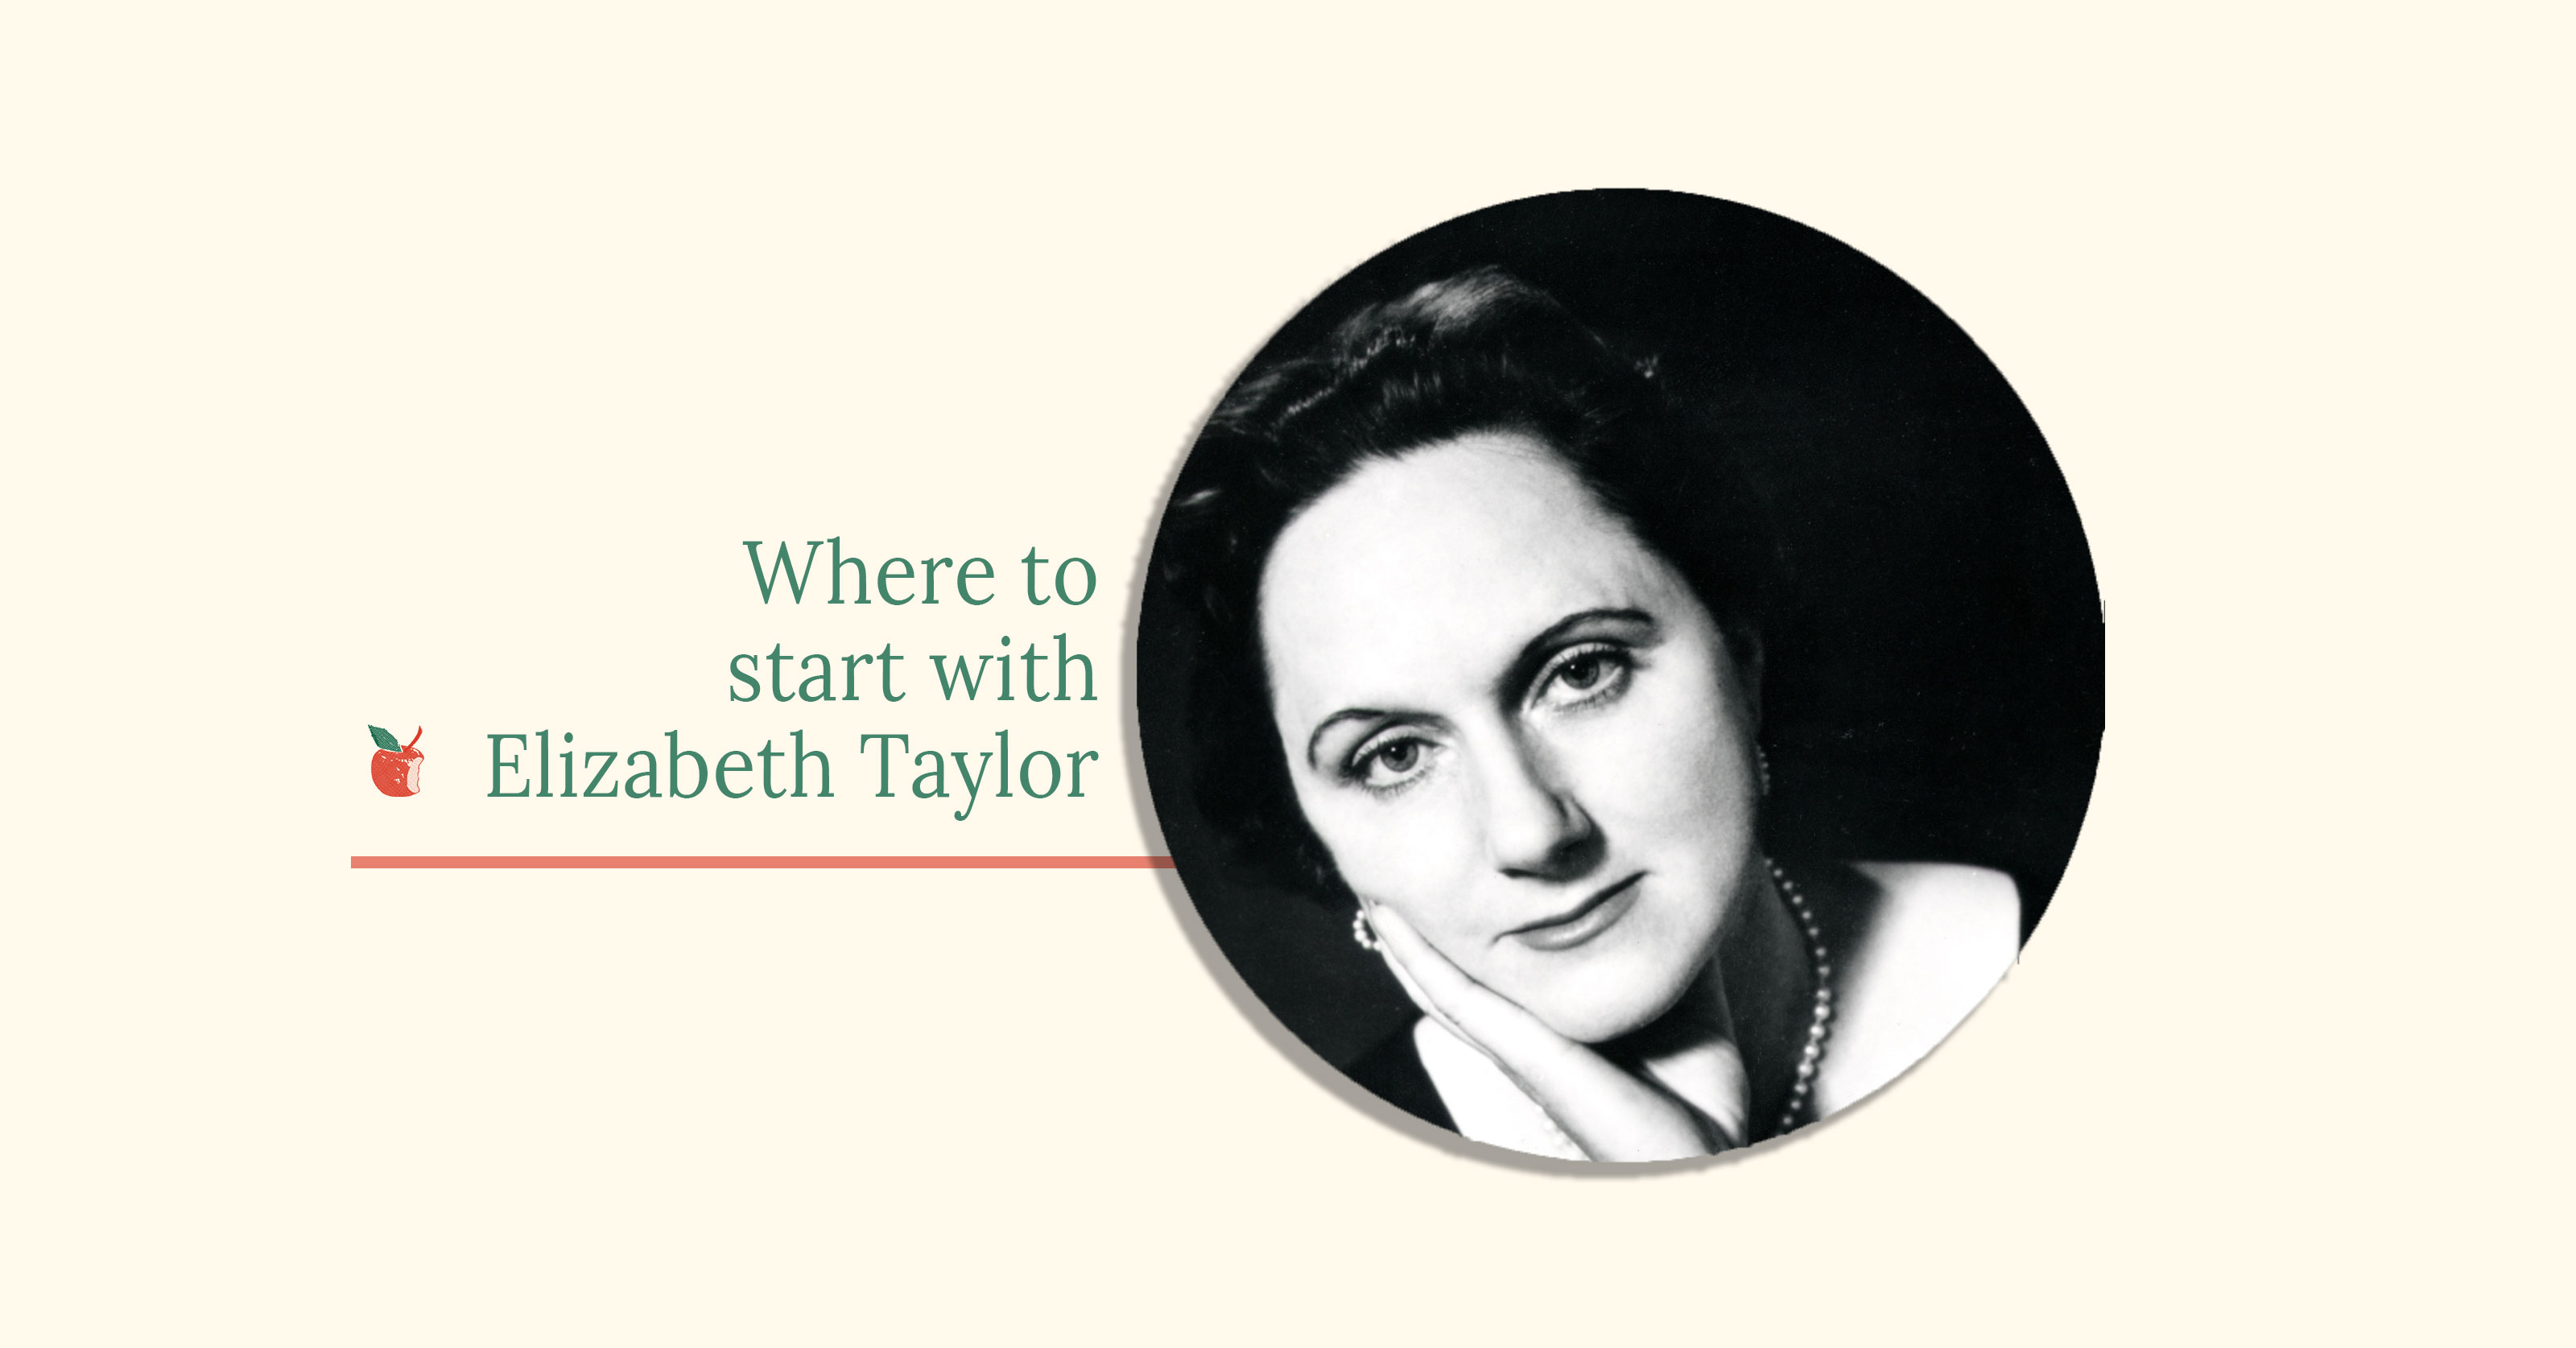 Where to start with Elizabeth Taylor